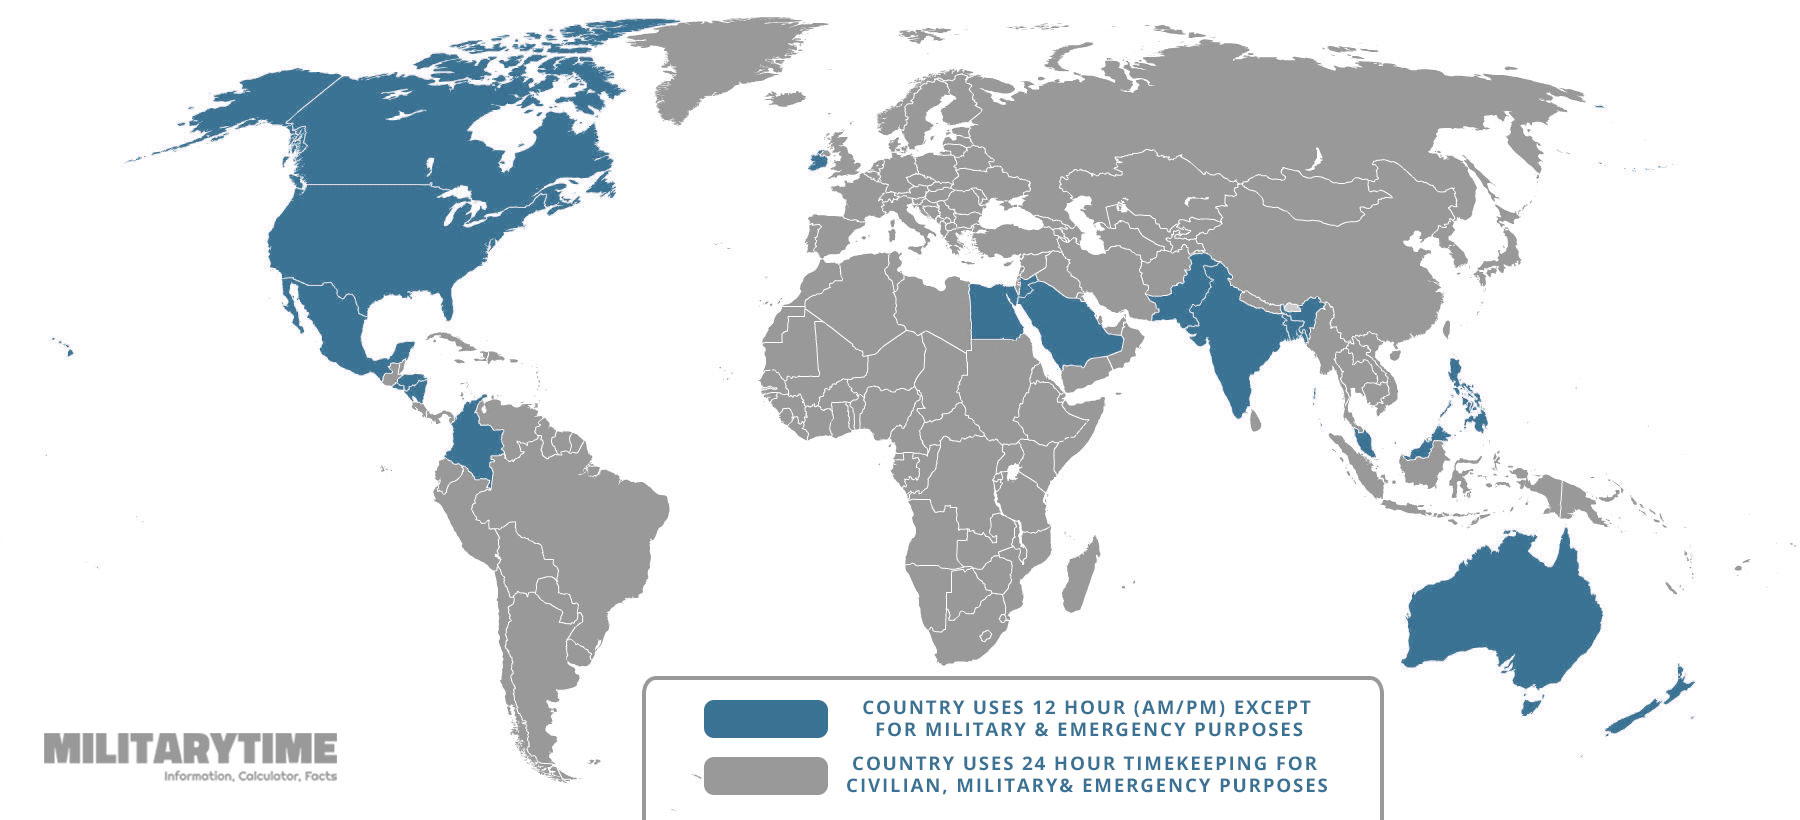 Countries that use military time (24 hour clock) versus standard (regular) AM/PM timekeeping